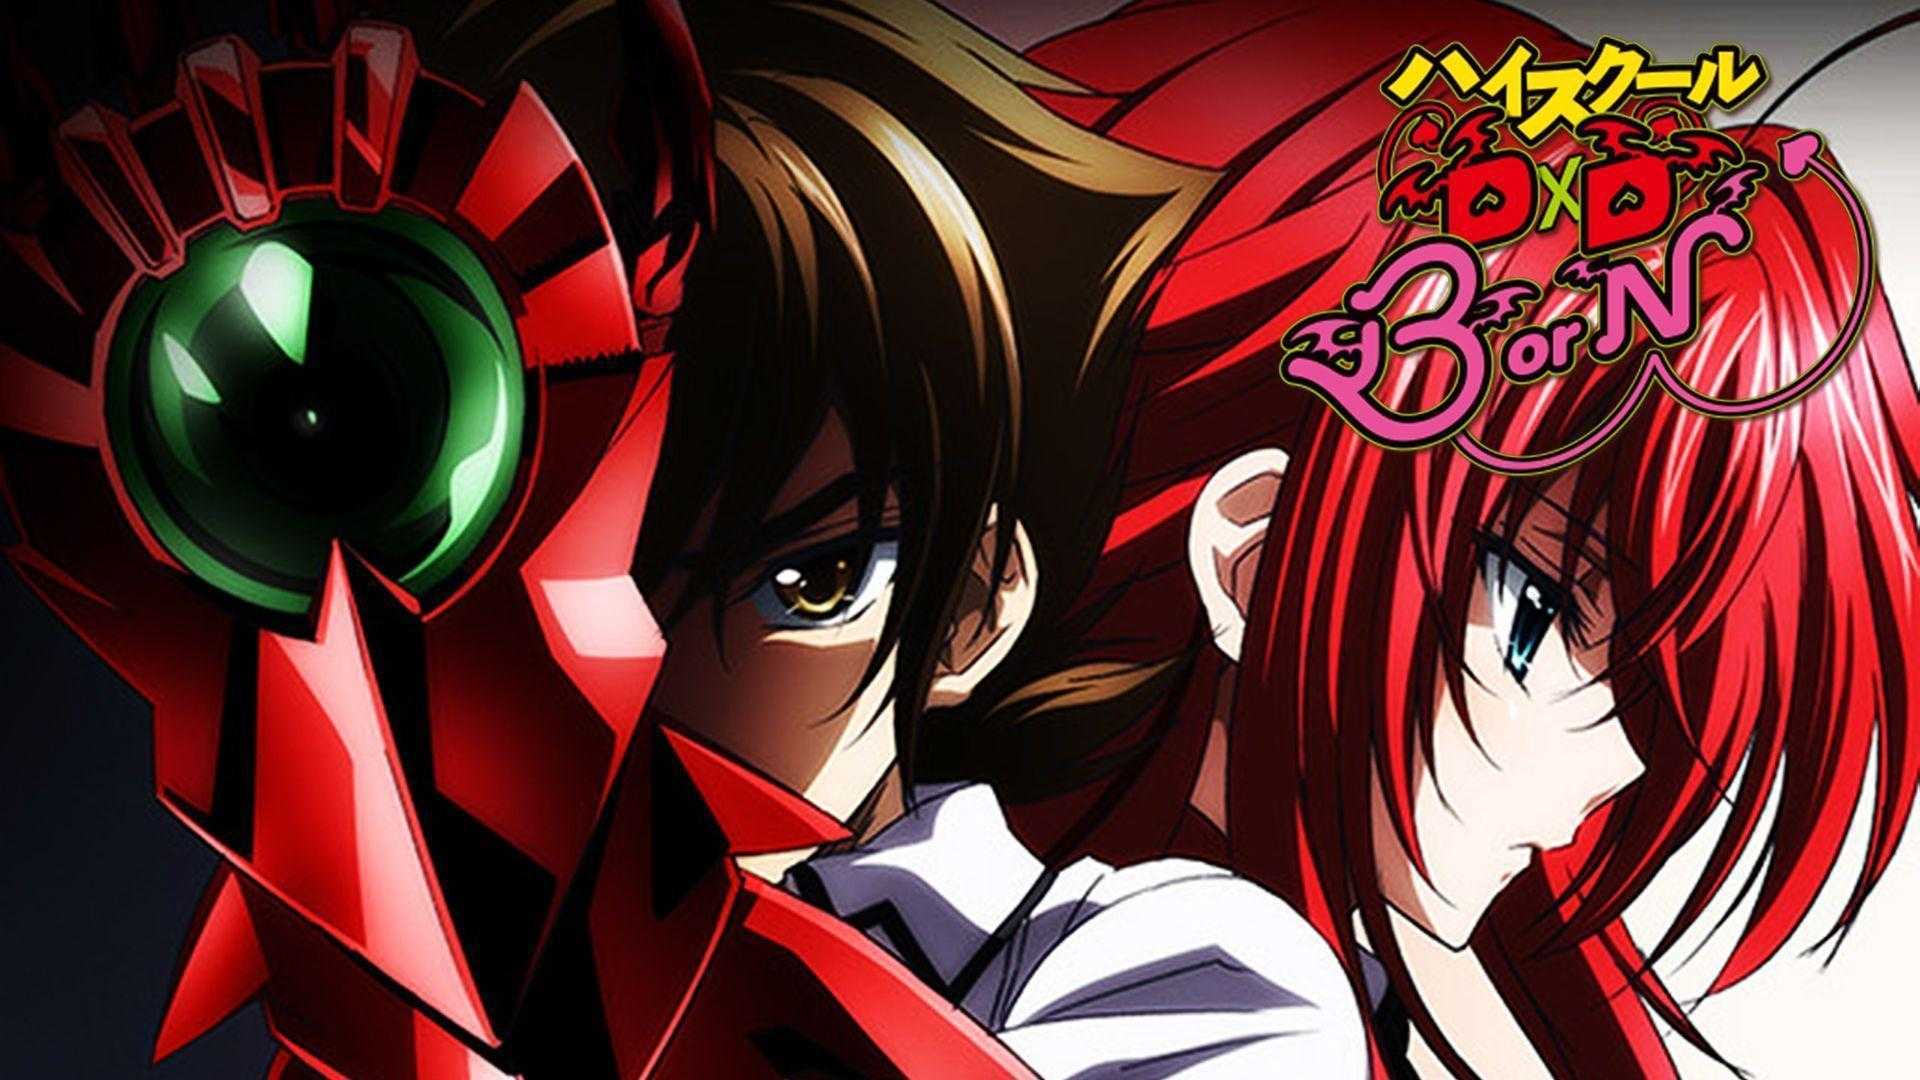 Free download High School Dxd Wallpaper Image Group 45 1920x1080